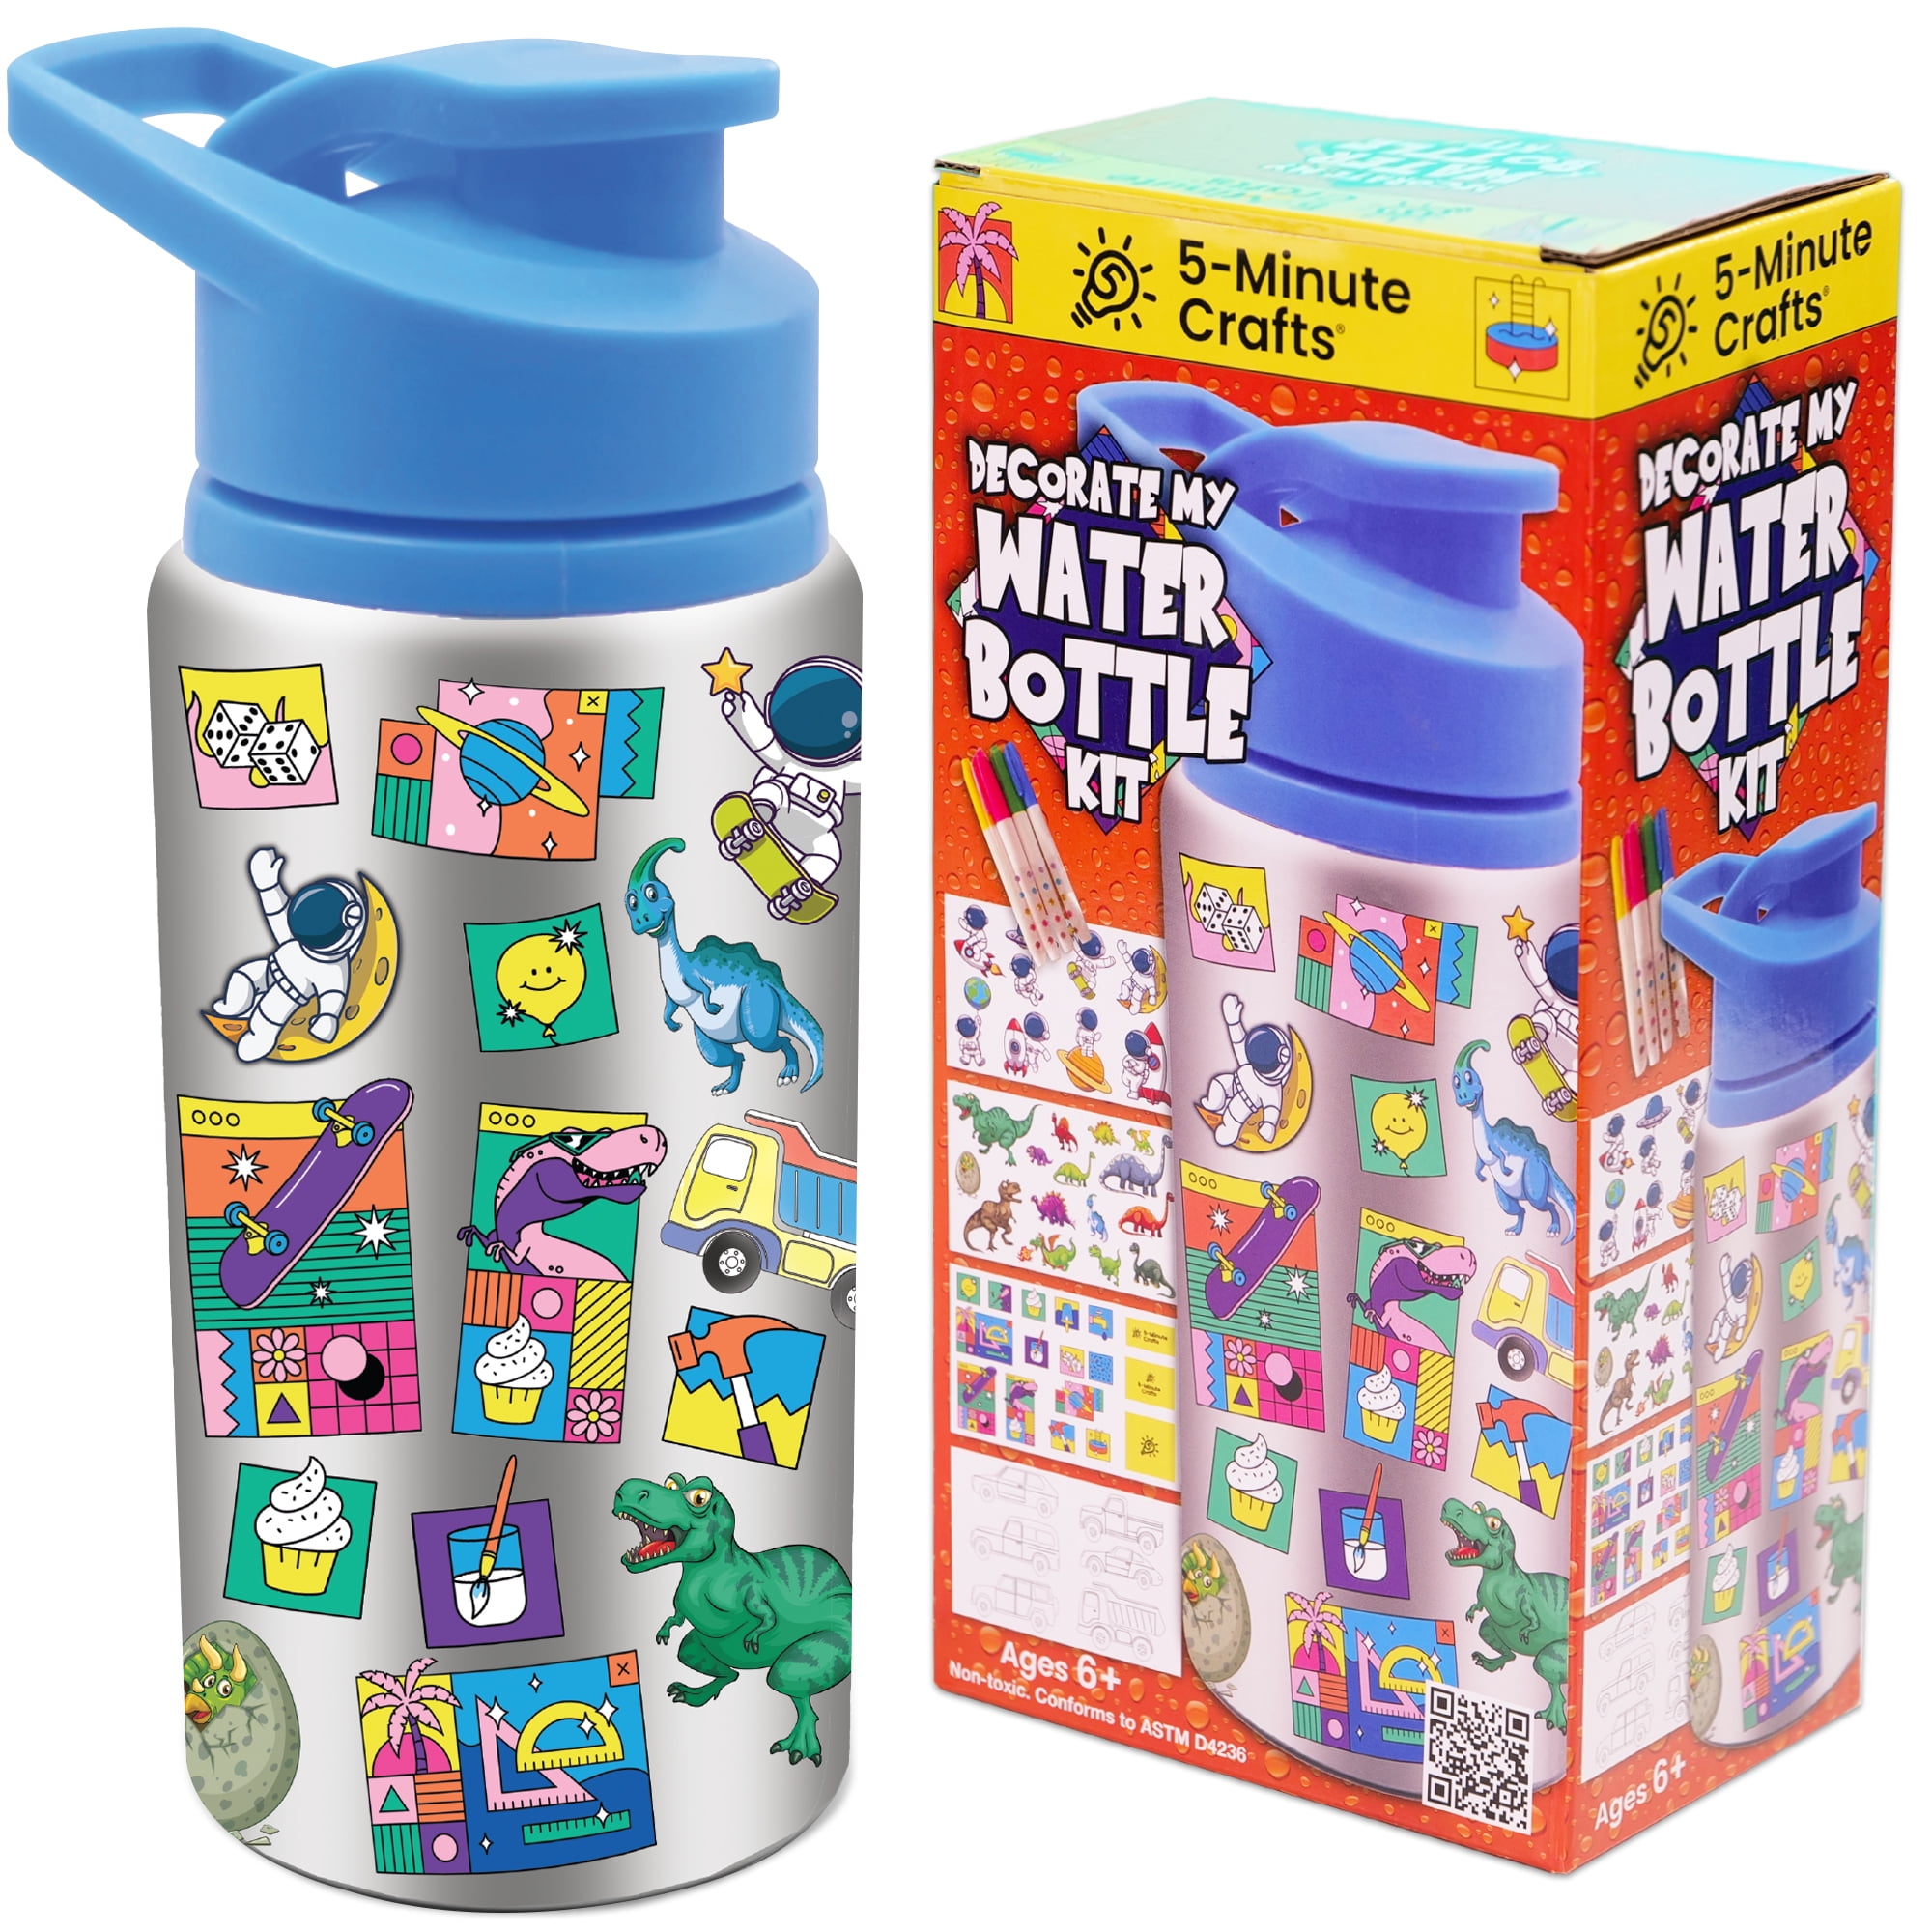 domila Gift for Boys, Decorate Your Own Water Bottle with Fun Stickers  Crafts Kit and DIY Arts Set Blue Vacuum Insulated Travel Mug